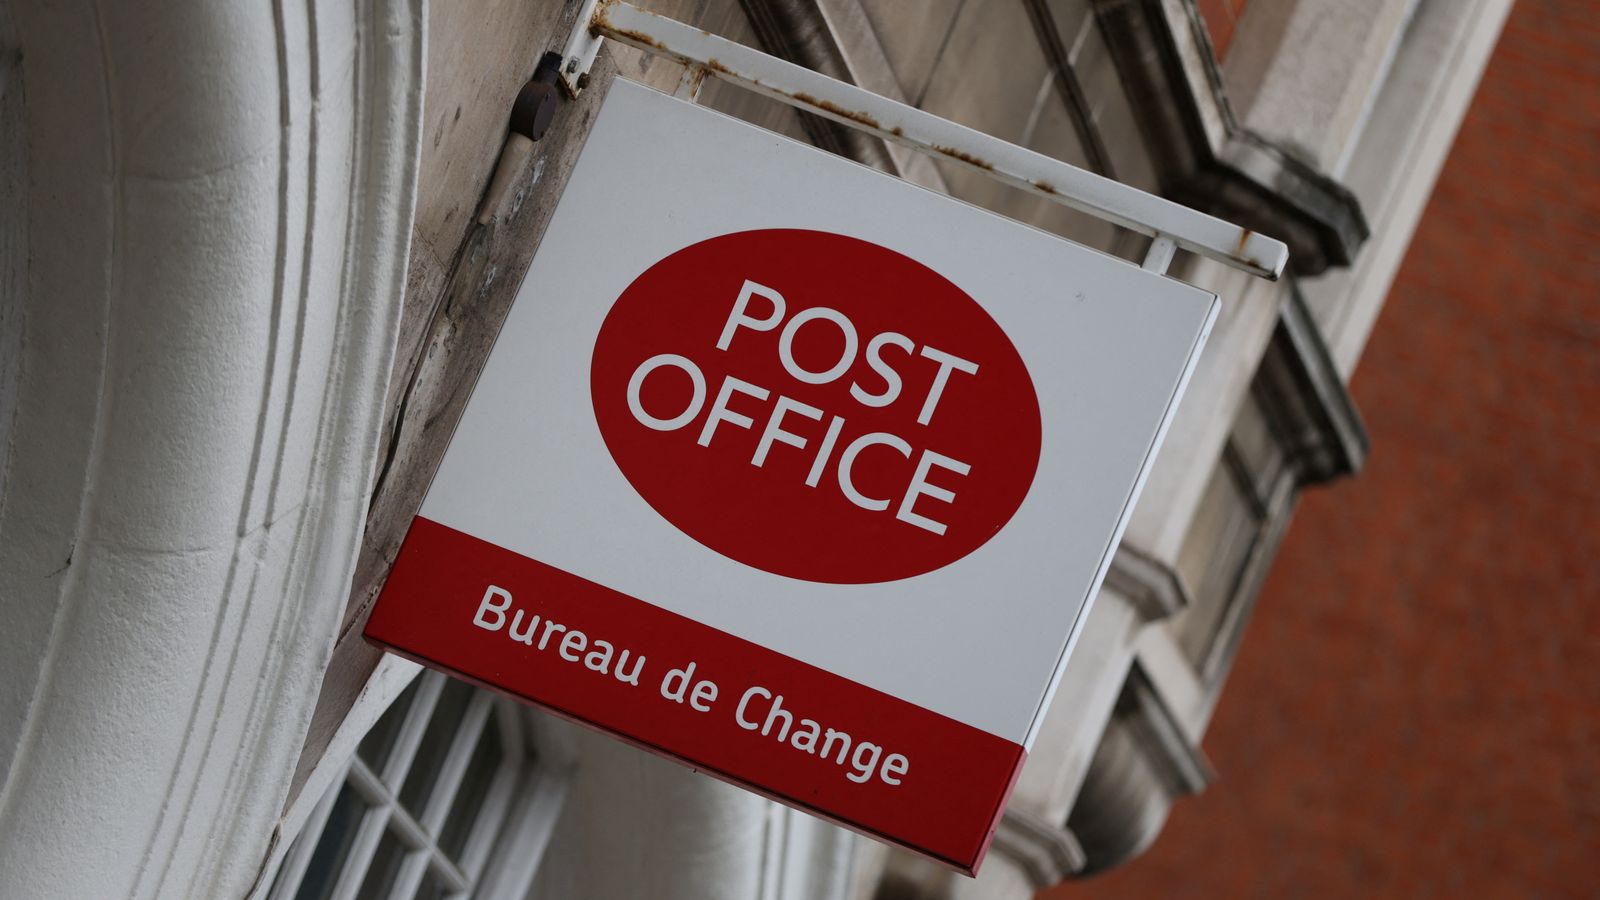 Labour demands Cabinet Office investigation into claims made by former Post Office chair Henry Staunton